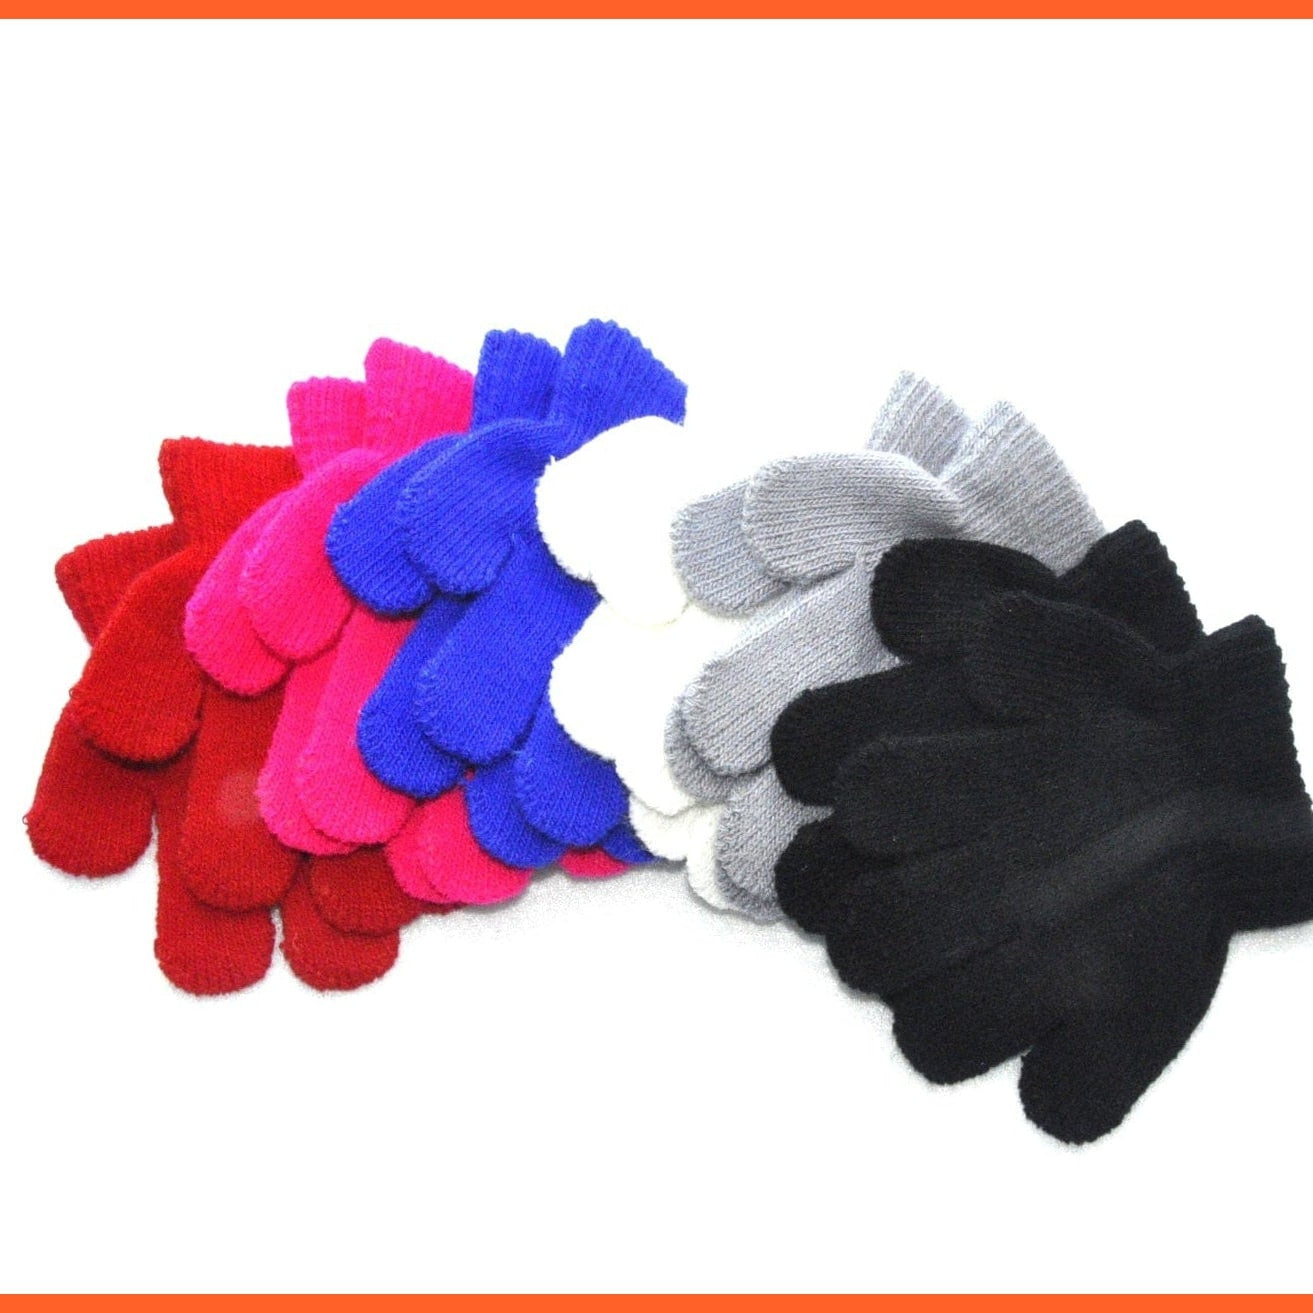 whatagift.com.au Kids Gloves 1-3years Children Winter Warm Gloves | Baby Toddler Knitted Acrylic Gloves